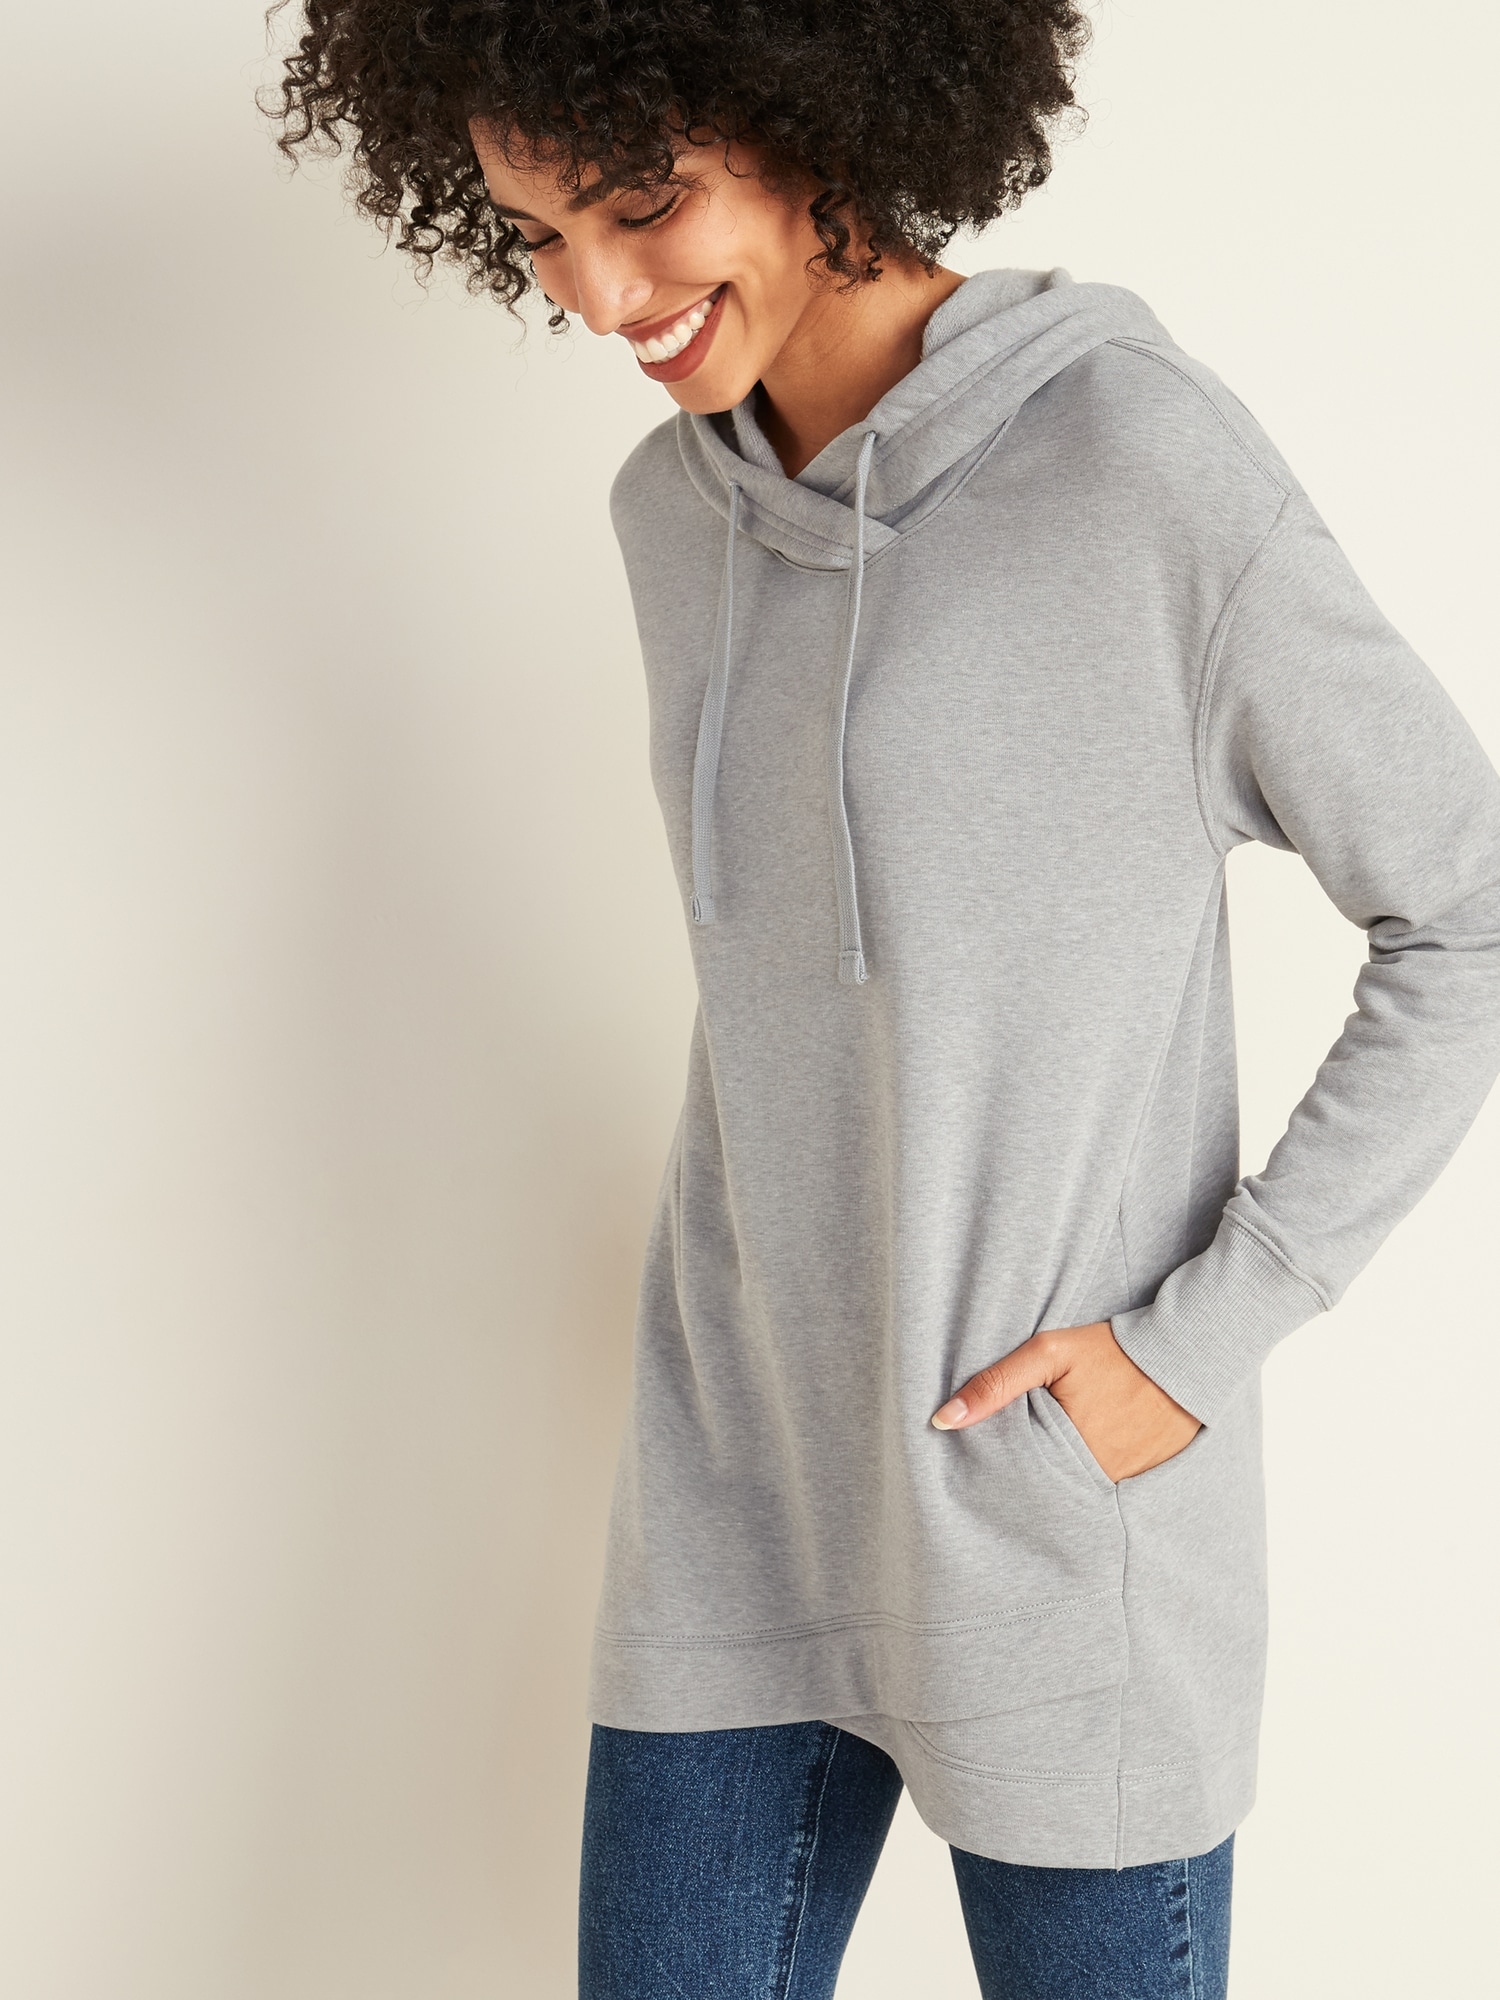 Women's French Terry Pullover Store, 57% OFF | www.ingeniovirtual.com